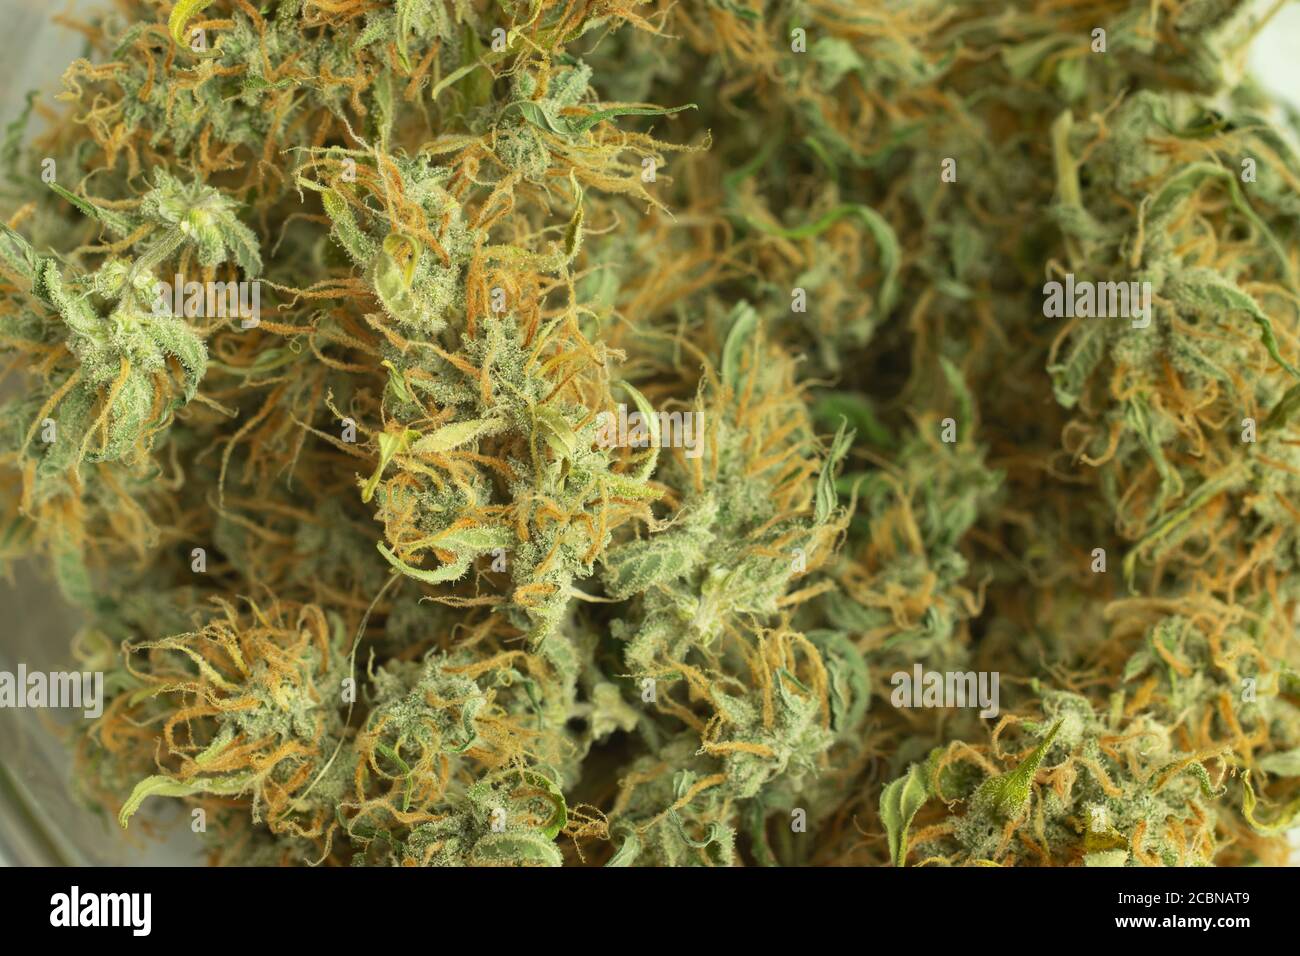 Organic medical cannabis used in healthcare. Legal marijuana buds background close-up. Macro photo of weed Stock Photo